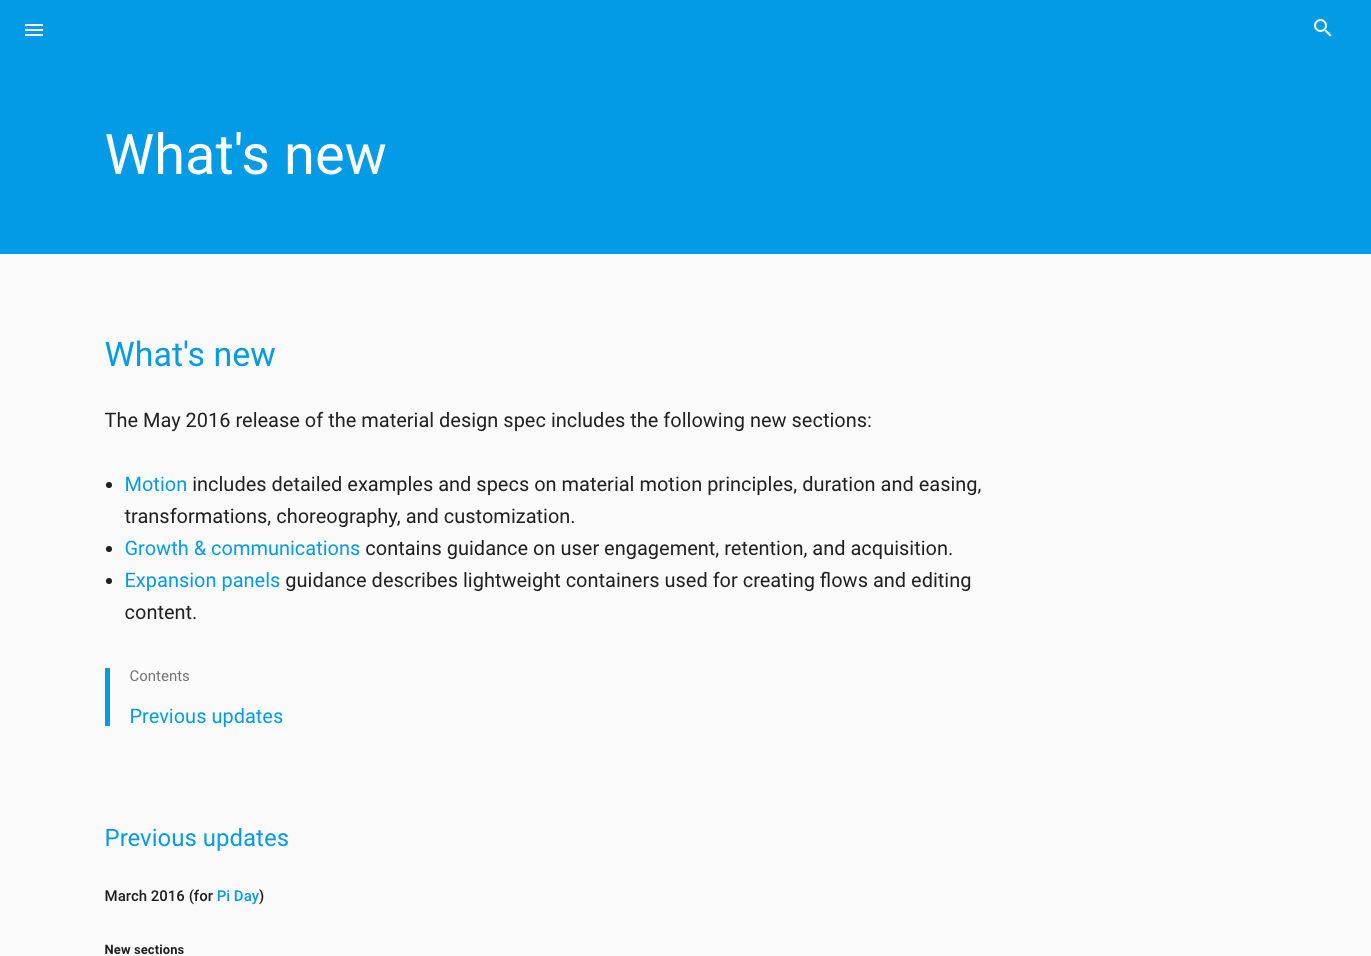 The material design team publishes a handy changelog within its style guide so users can easily learn about the latest updates and improvements to the system.